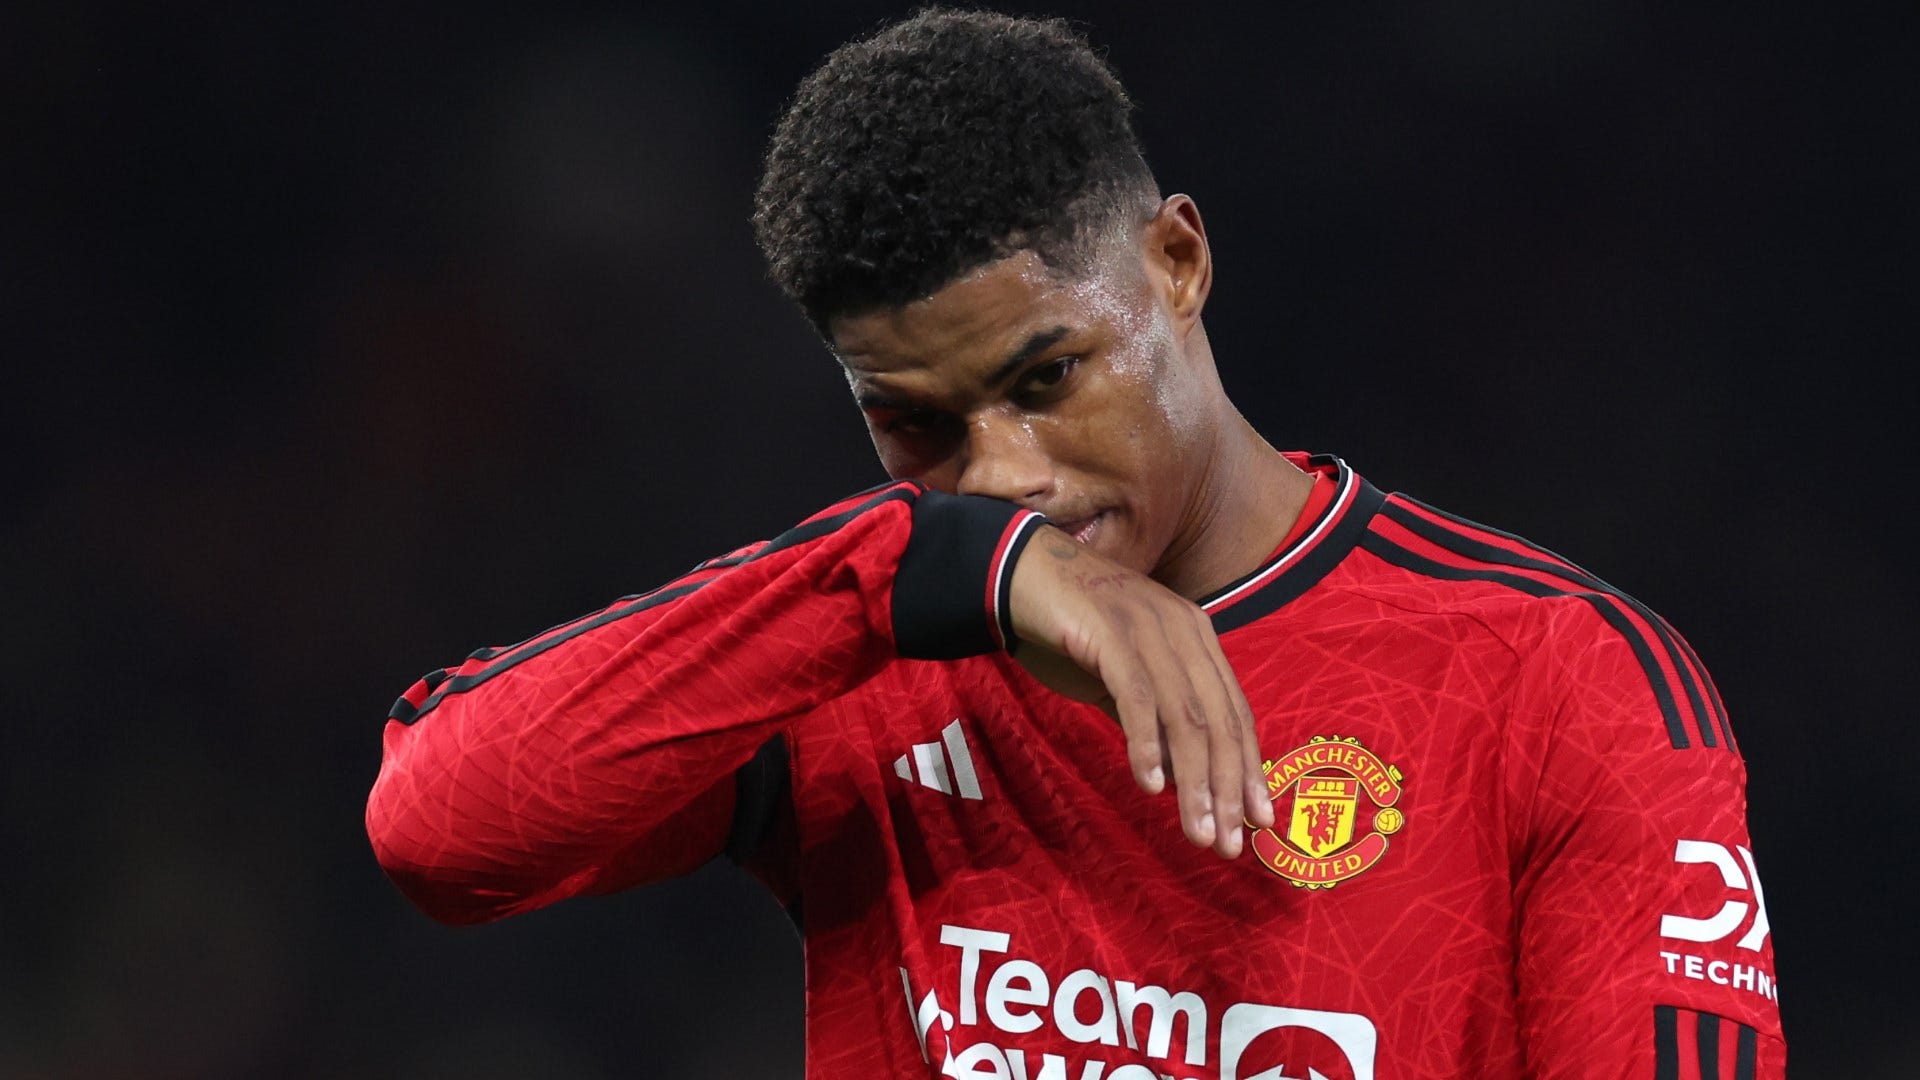 ‘He can’t keep doing this’ – Marcus Rashford accused of ‘wasting his talent’ at Man Utd after inviting Erik ten Hag’s wrath with nightclub visit